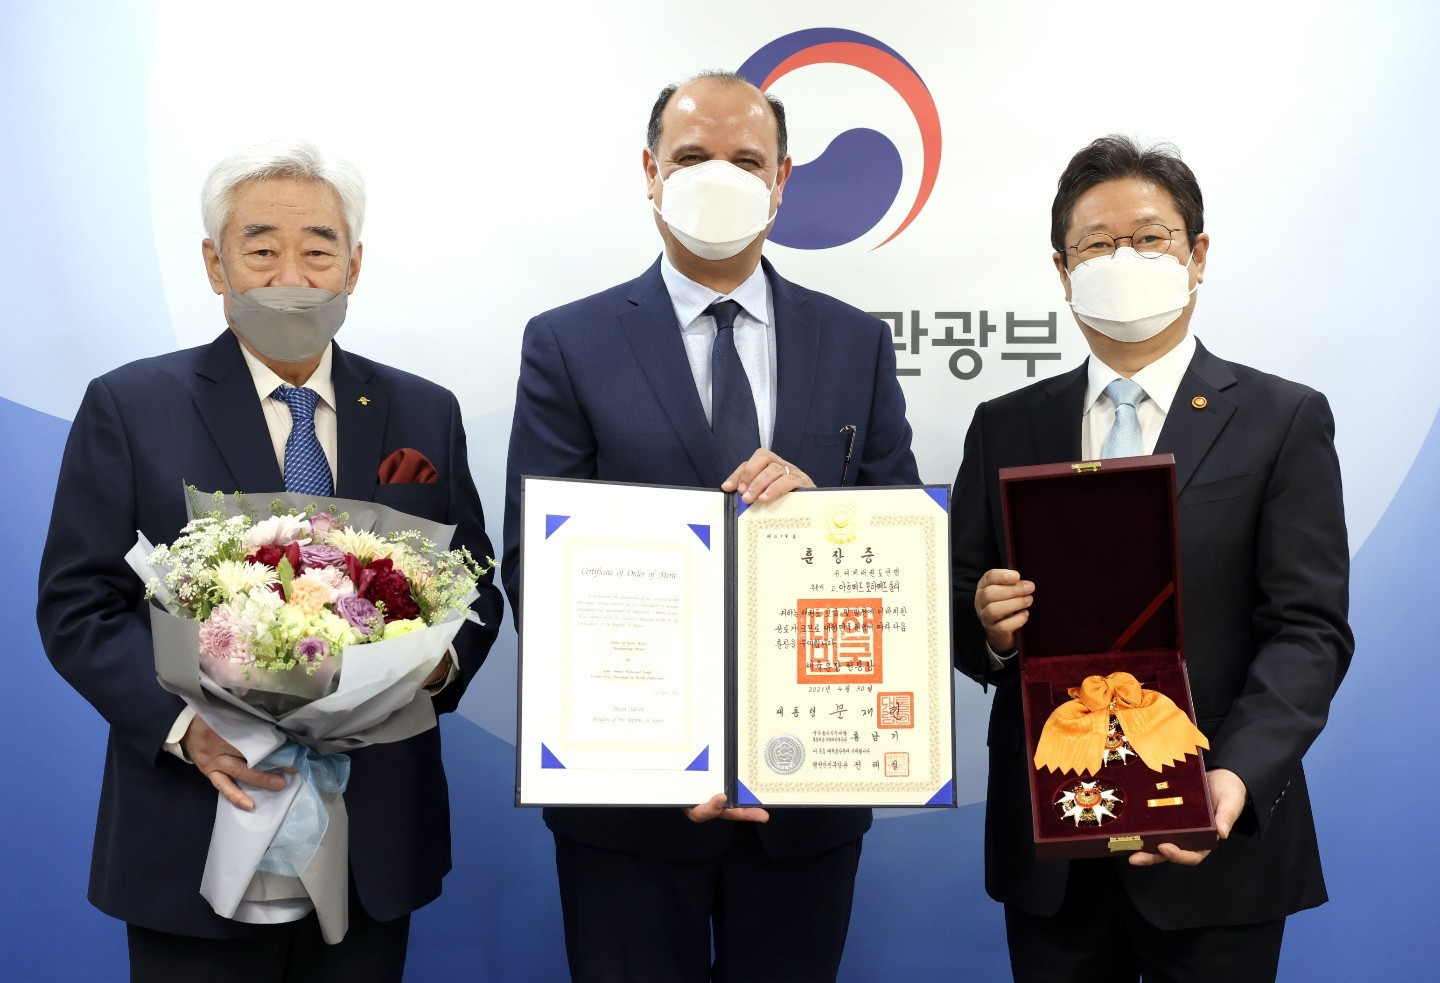 Ahmed Fouly was posthumously awarded the Cheongryong Medal in May but his family could not attend the ceremony in South Korea ©World Taekwondo